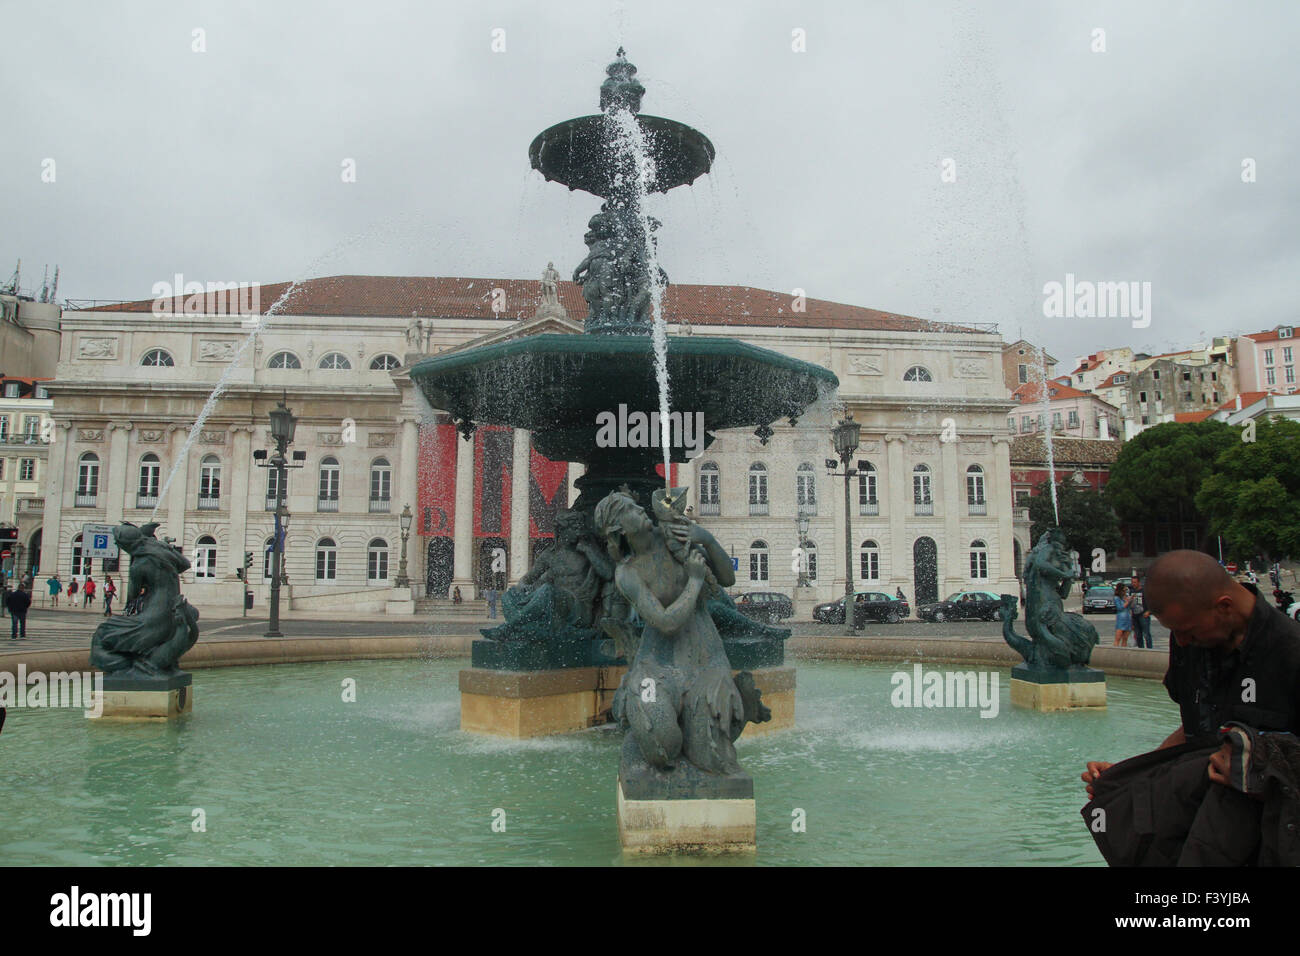 Lisbon, Portugal, 4 October, 2015. A fountain at Rossio square in Lisbon. Credit: David Mbiyu/ Alamy Live News Stock Photo